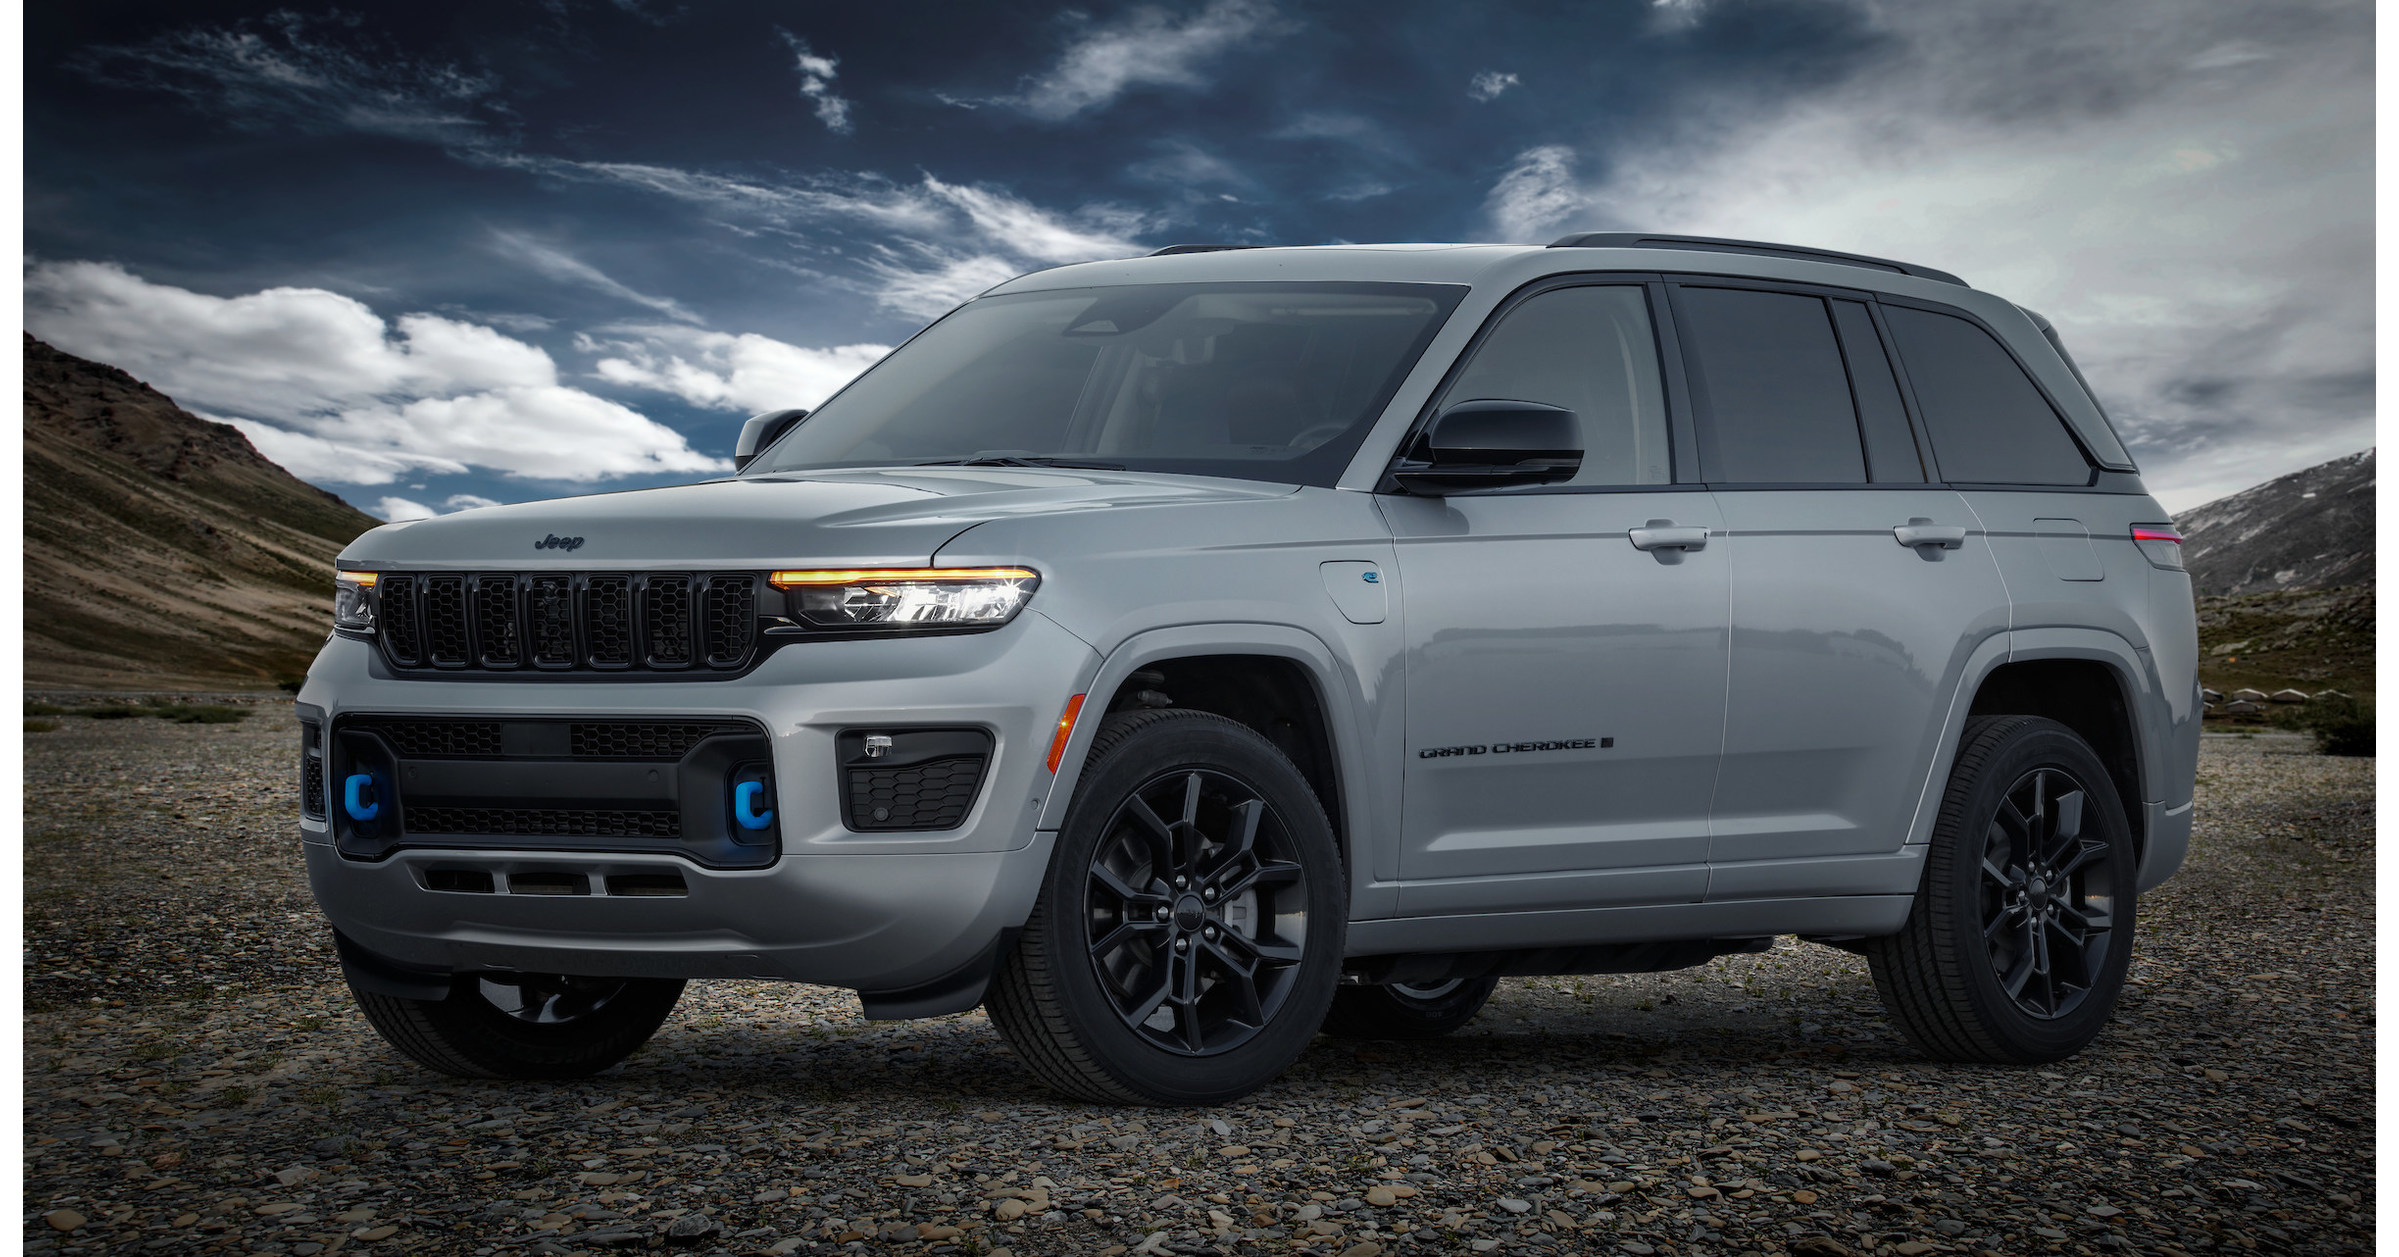 Jeep® Brand Celebrates 30 Years of Legendary Grand Cherokee 4x4 Capability  and Premium Design With Debut of 2023 Jeep Grand Cherokee 4xe 30th  Anniversary Edition at 2022 Detroit Auto Show